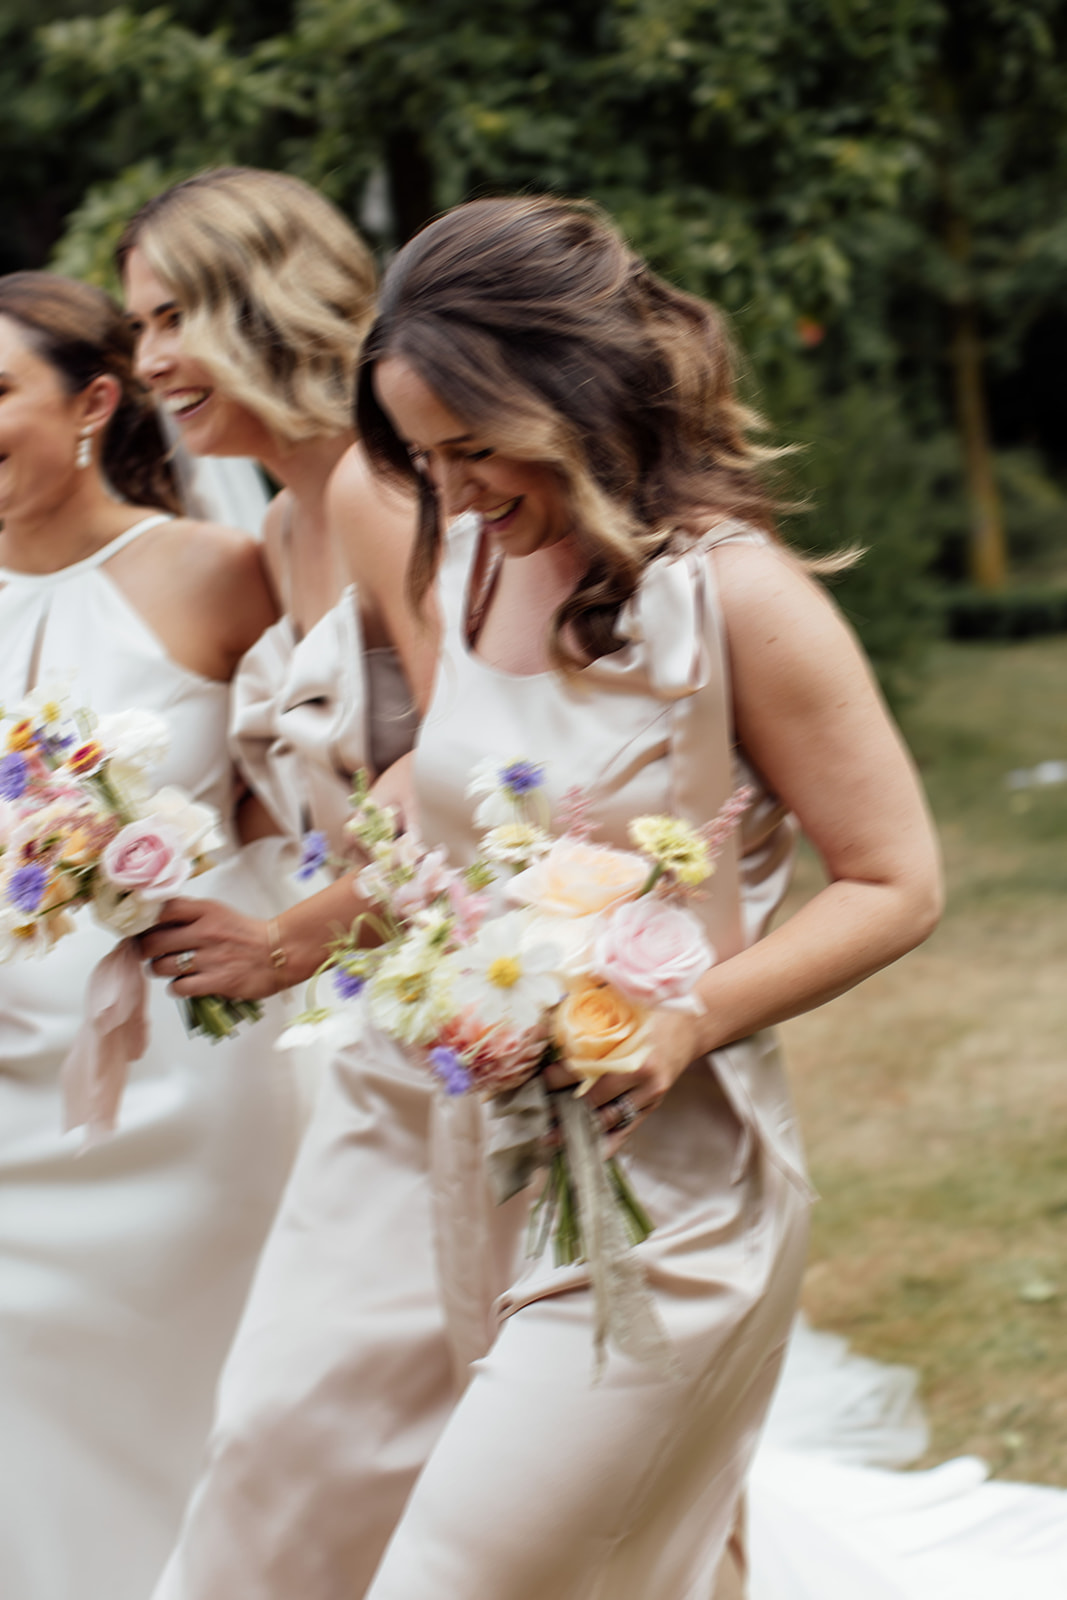 Layne by Karen Willis Holmes-halter neckline wedding dress-Jessica & Tim- Bride is seen running around the garden of her New Zealand Wedding venue with her bridesmaids. Bride and bridesmaids are holding wild floral bouquets, featuring soft pinks and pastel blues.